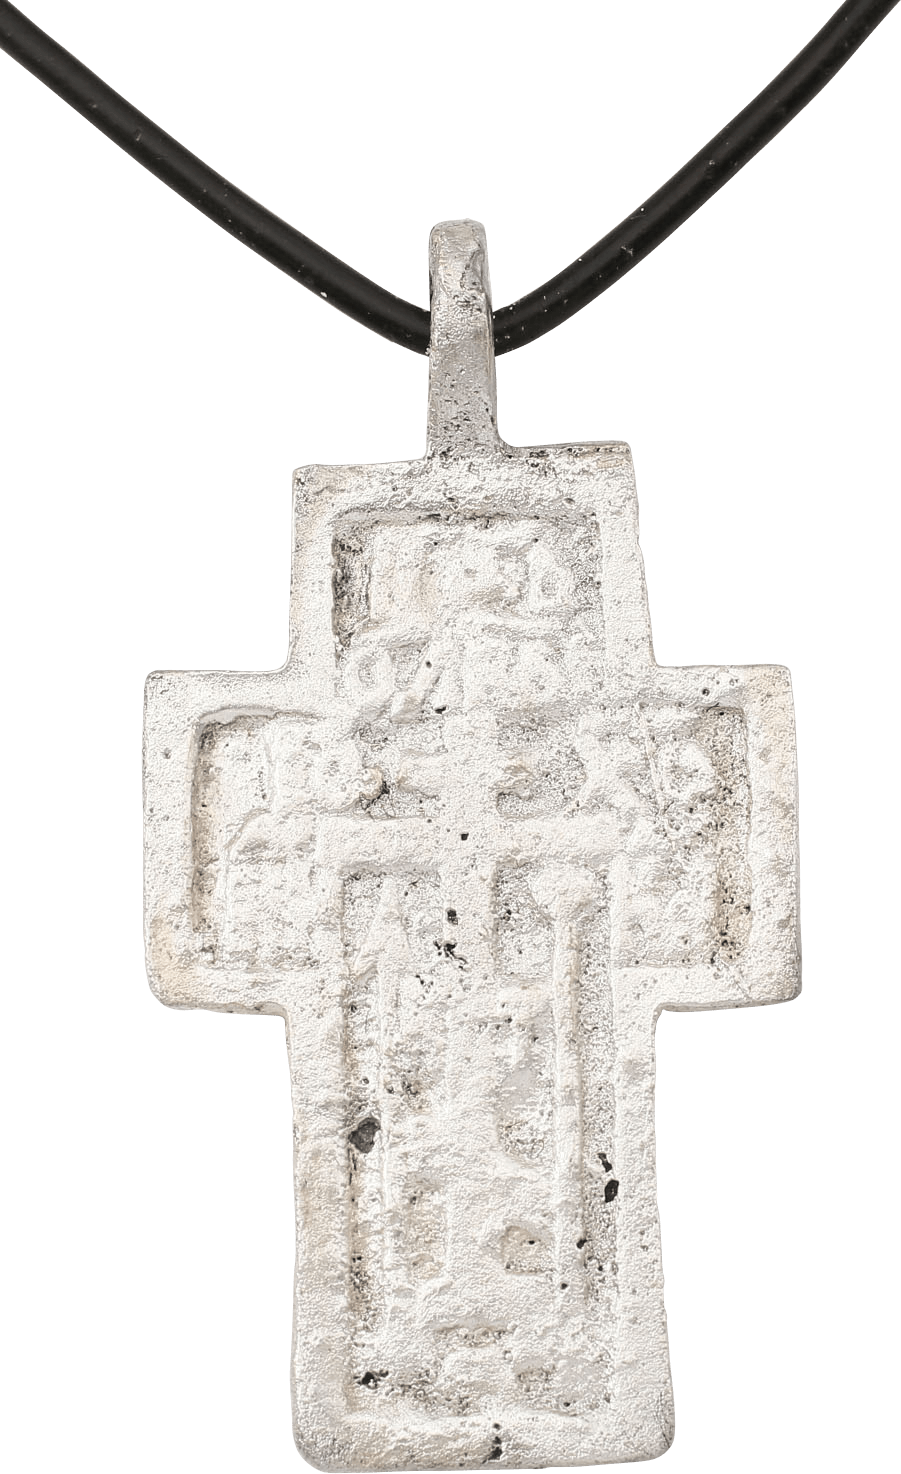 EASTERN EUROPEAN CHRISTIAN CROSS NECKLACE, 17TH-18TH C. - Picardi Jewelers